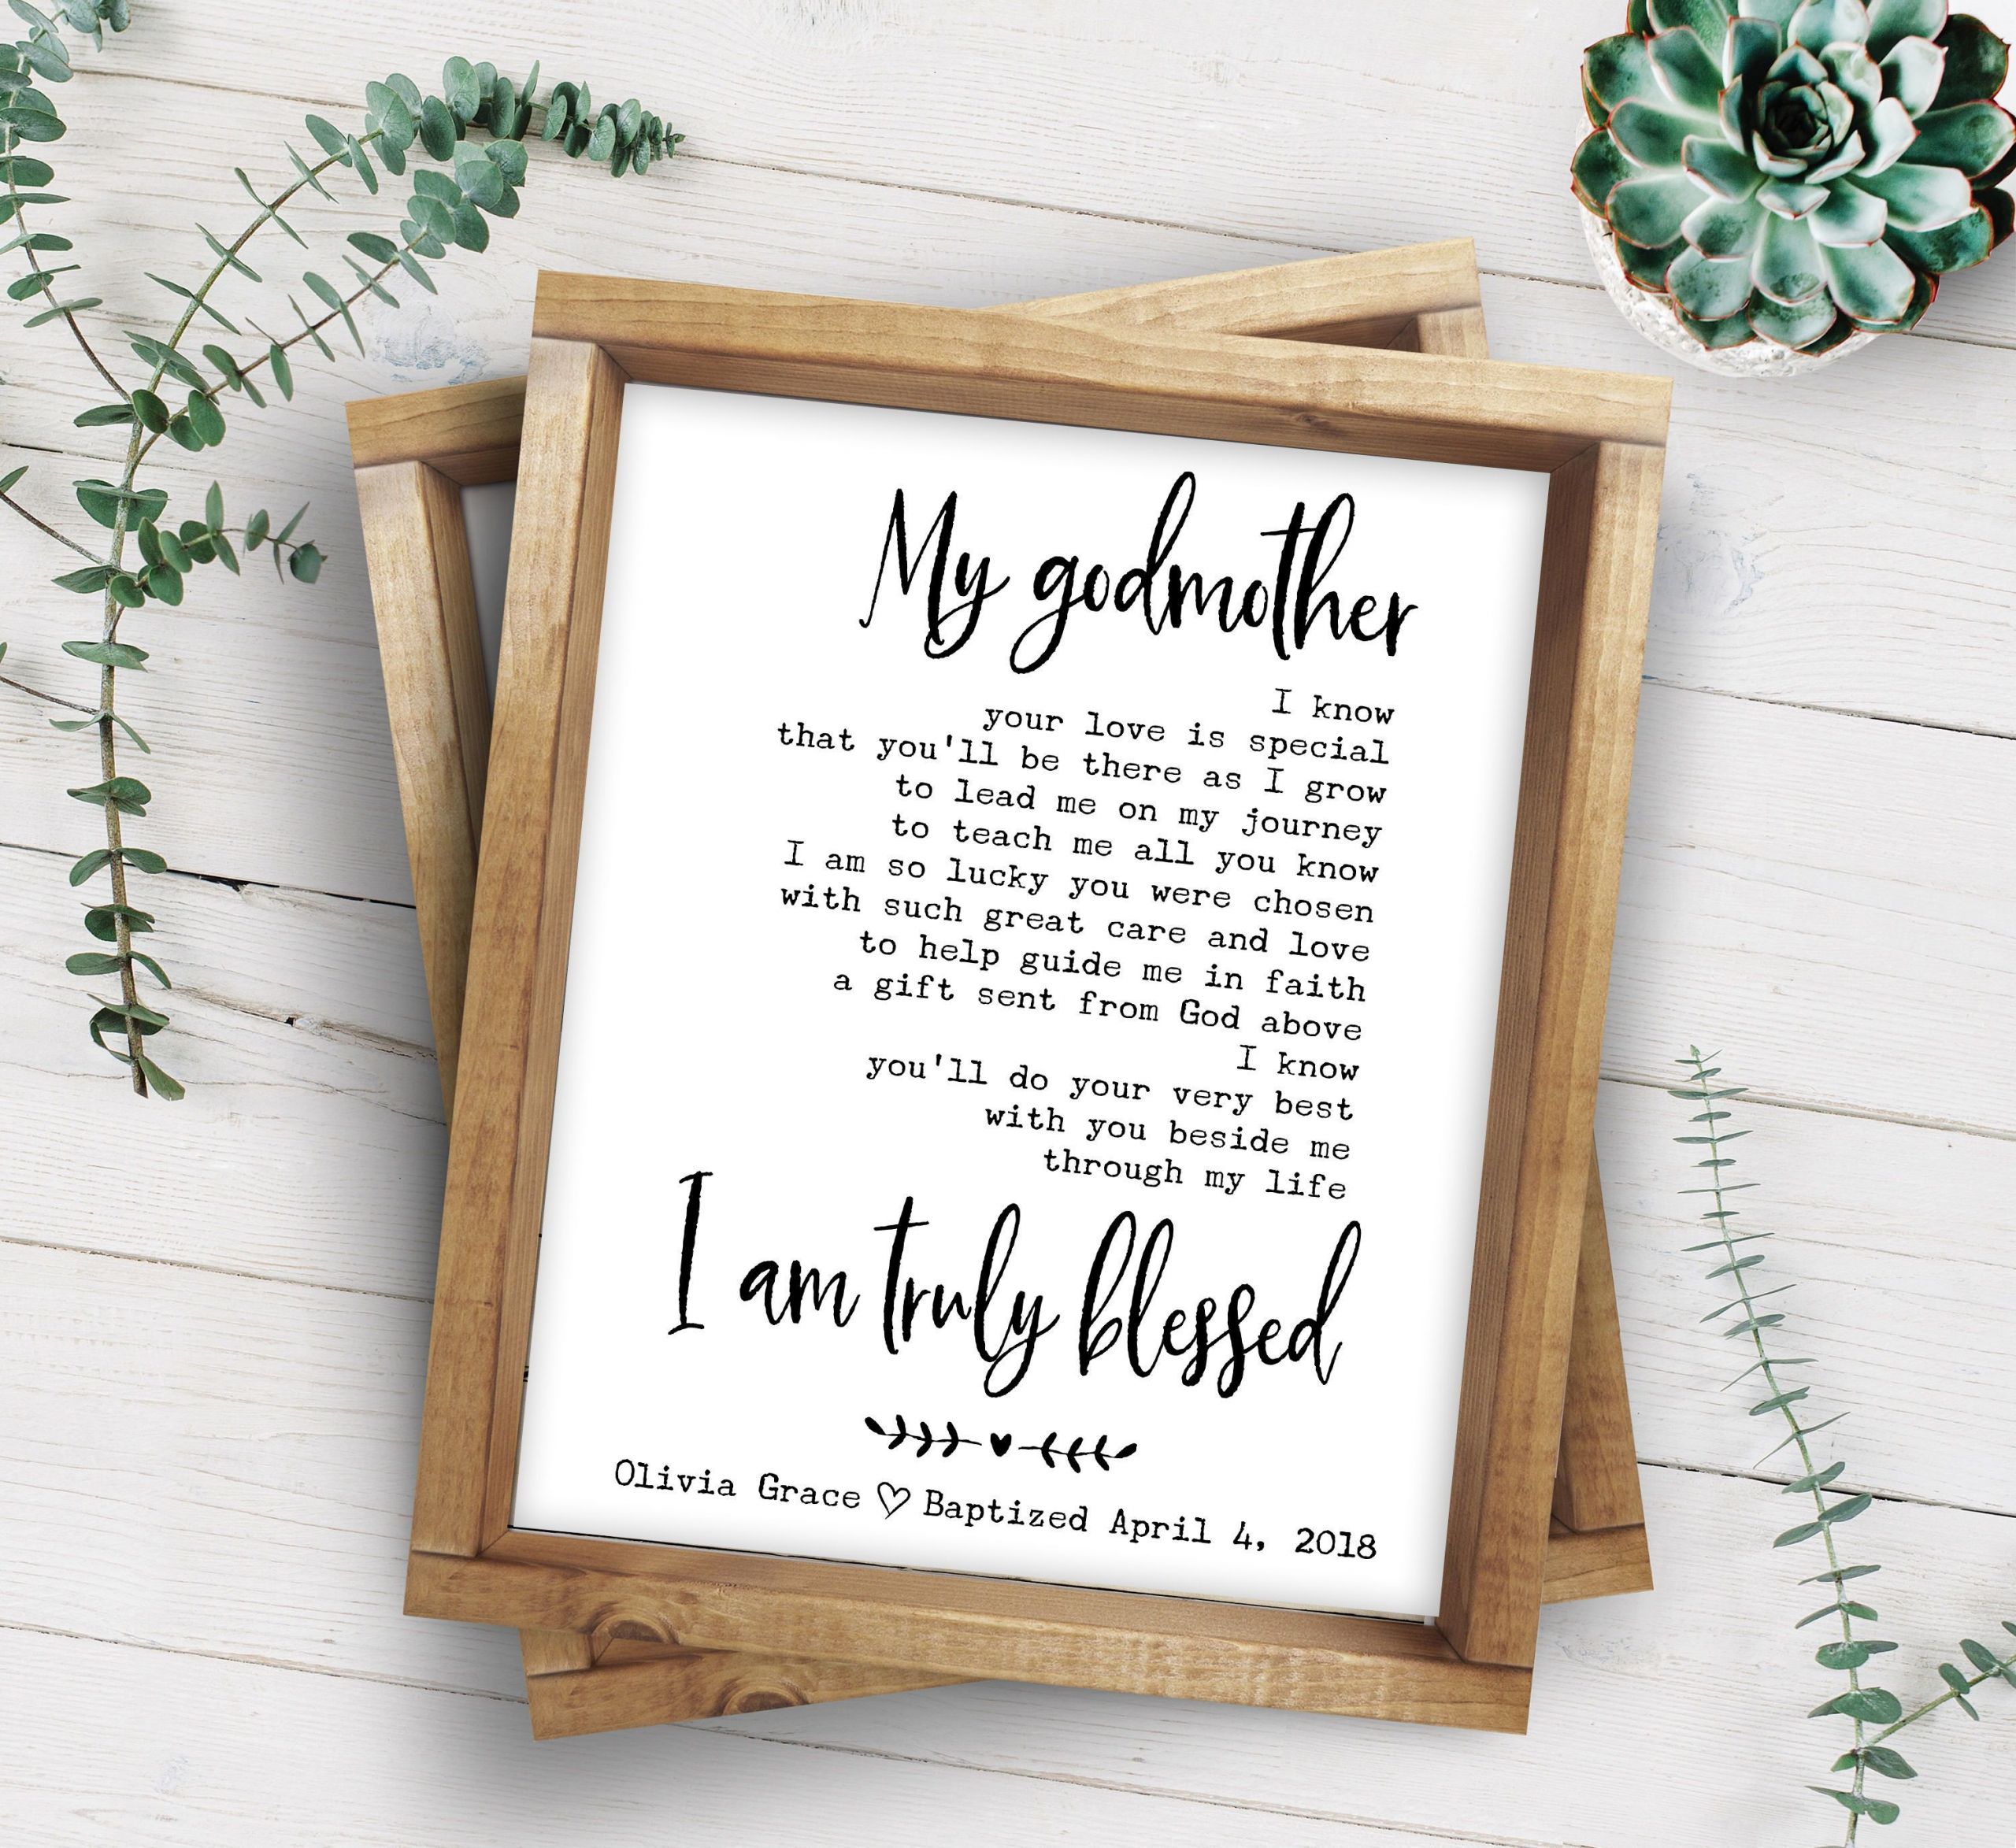 Christening Gift Ideas From Godmother
 Godmother Poem Godmother Christening Gift